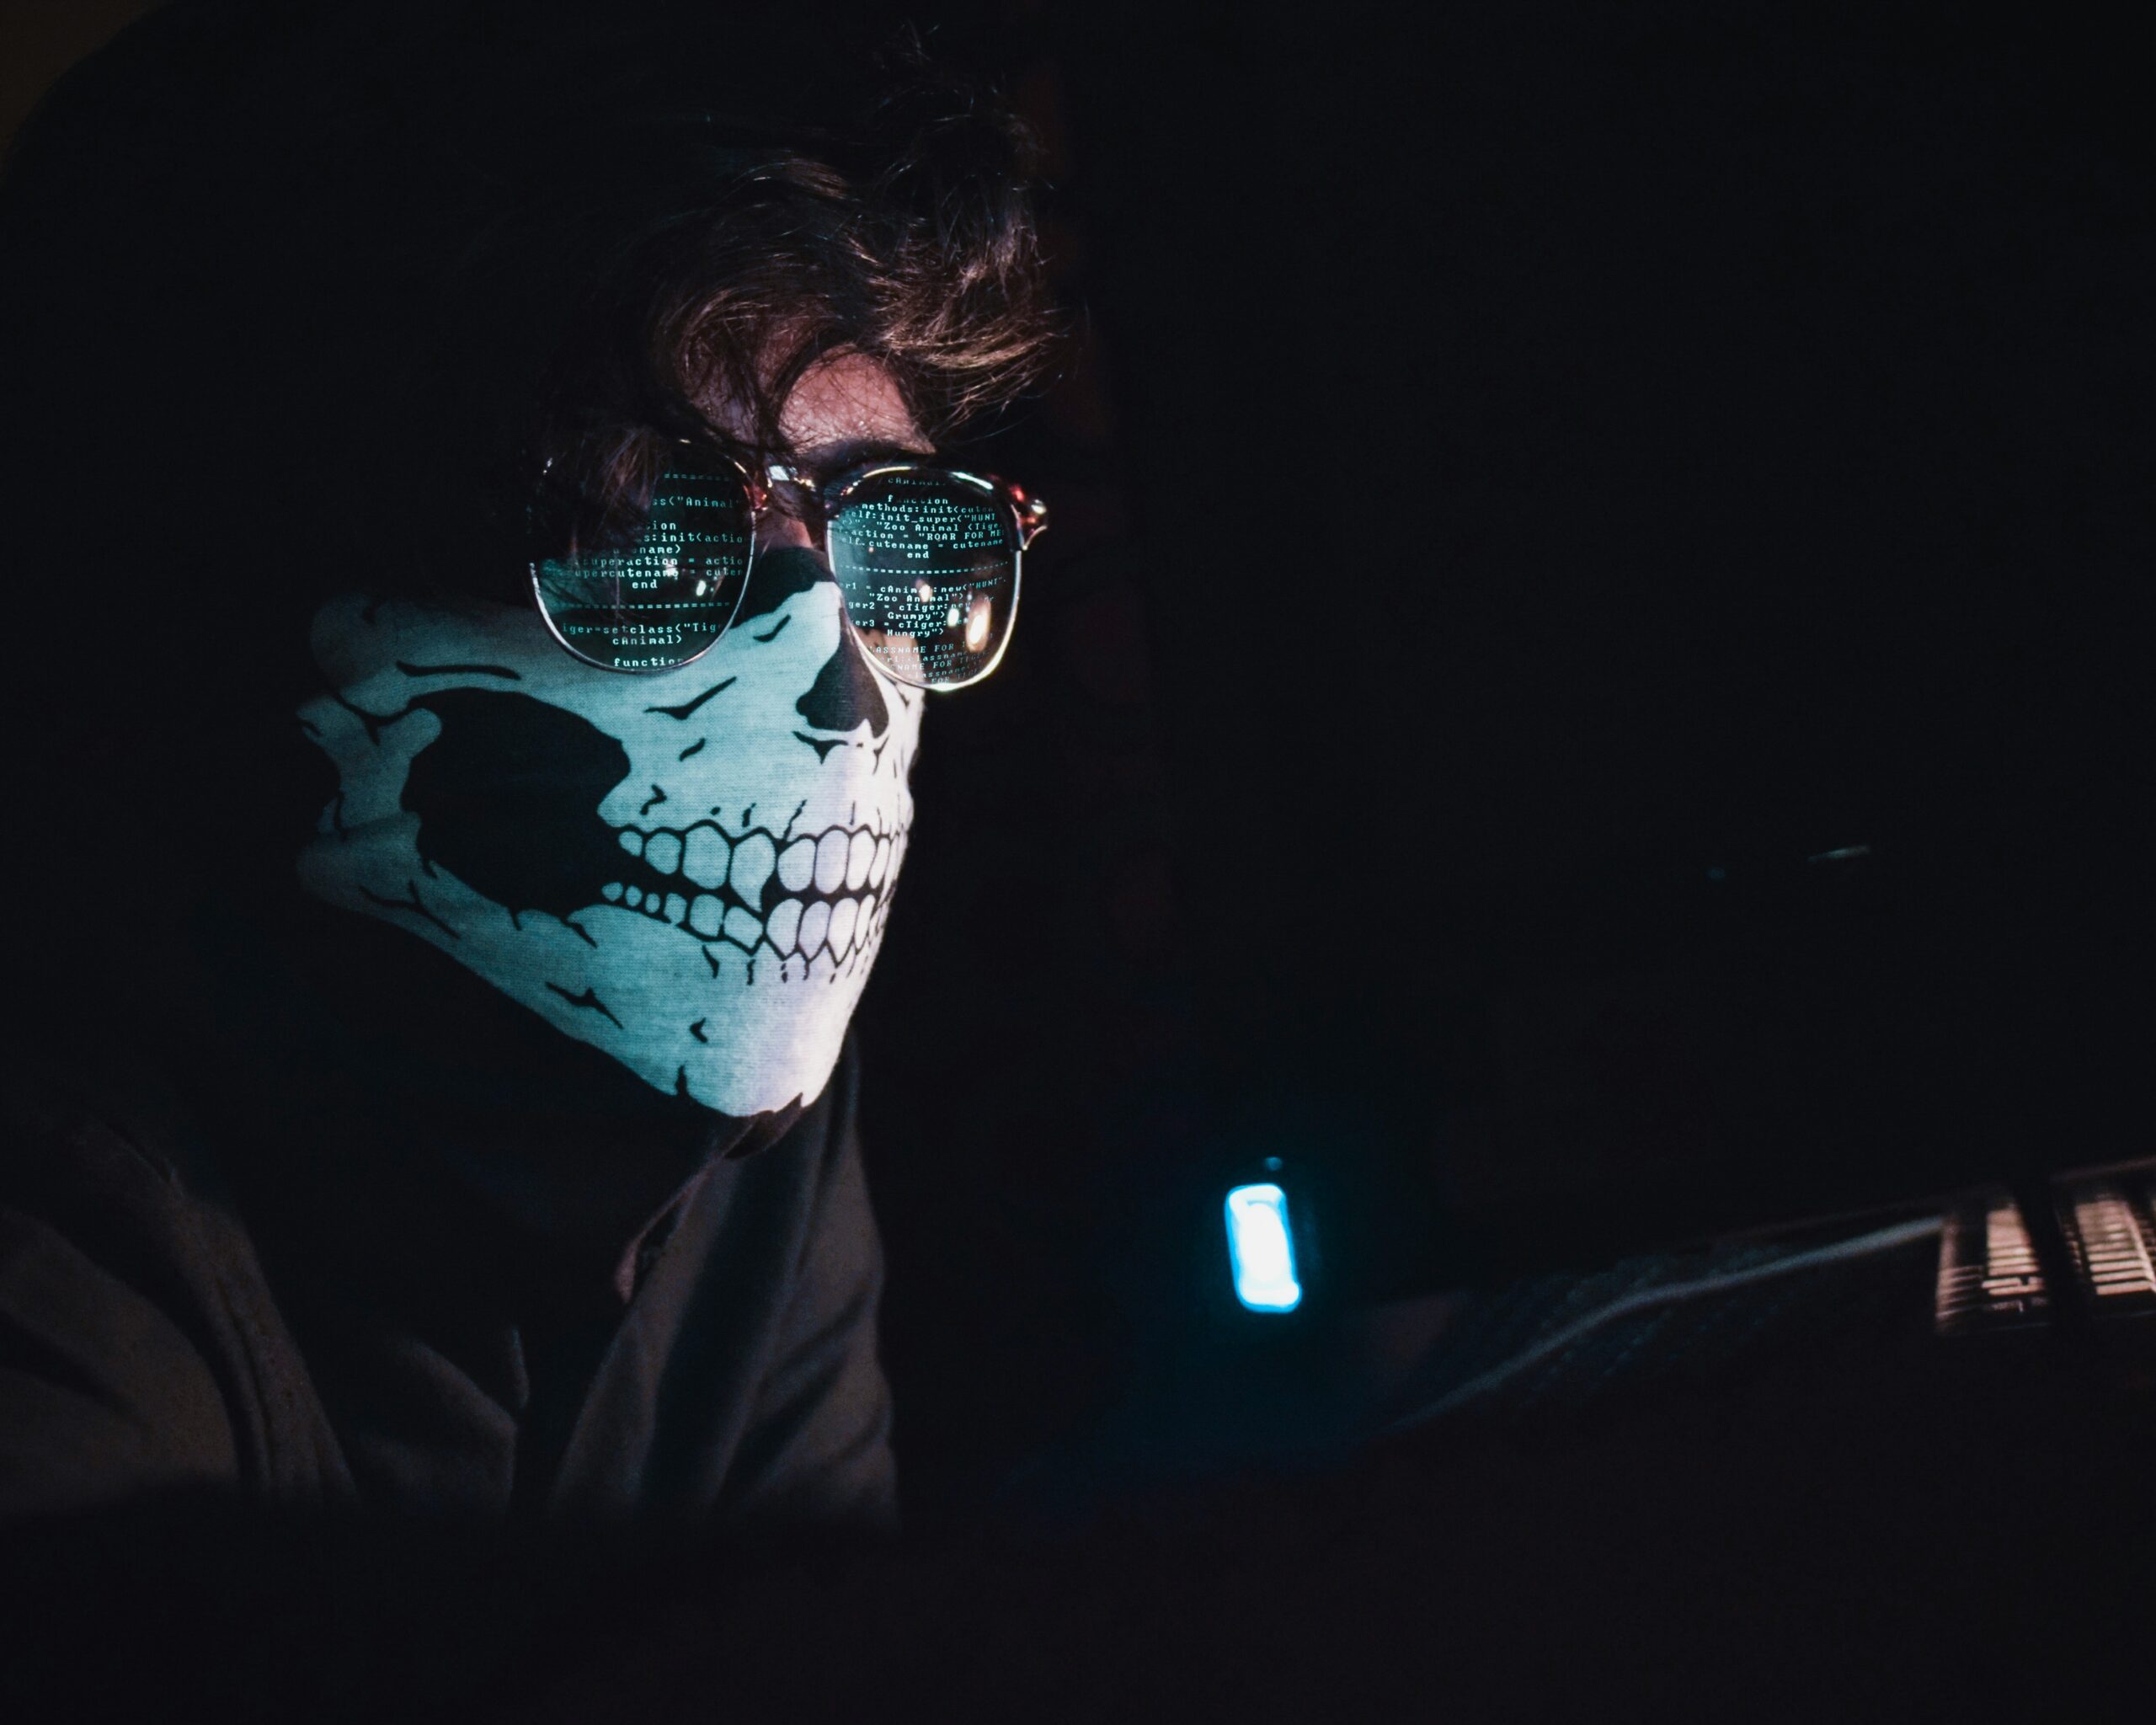 A person wearing glasses and a mask, appearing both mysterious and incognito.